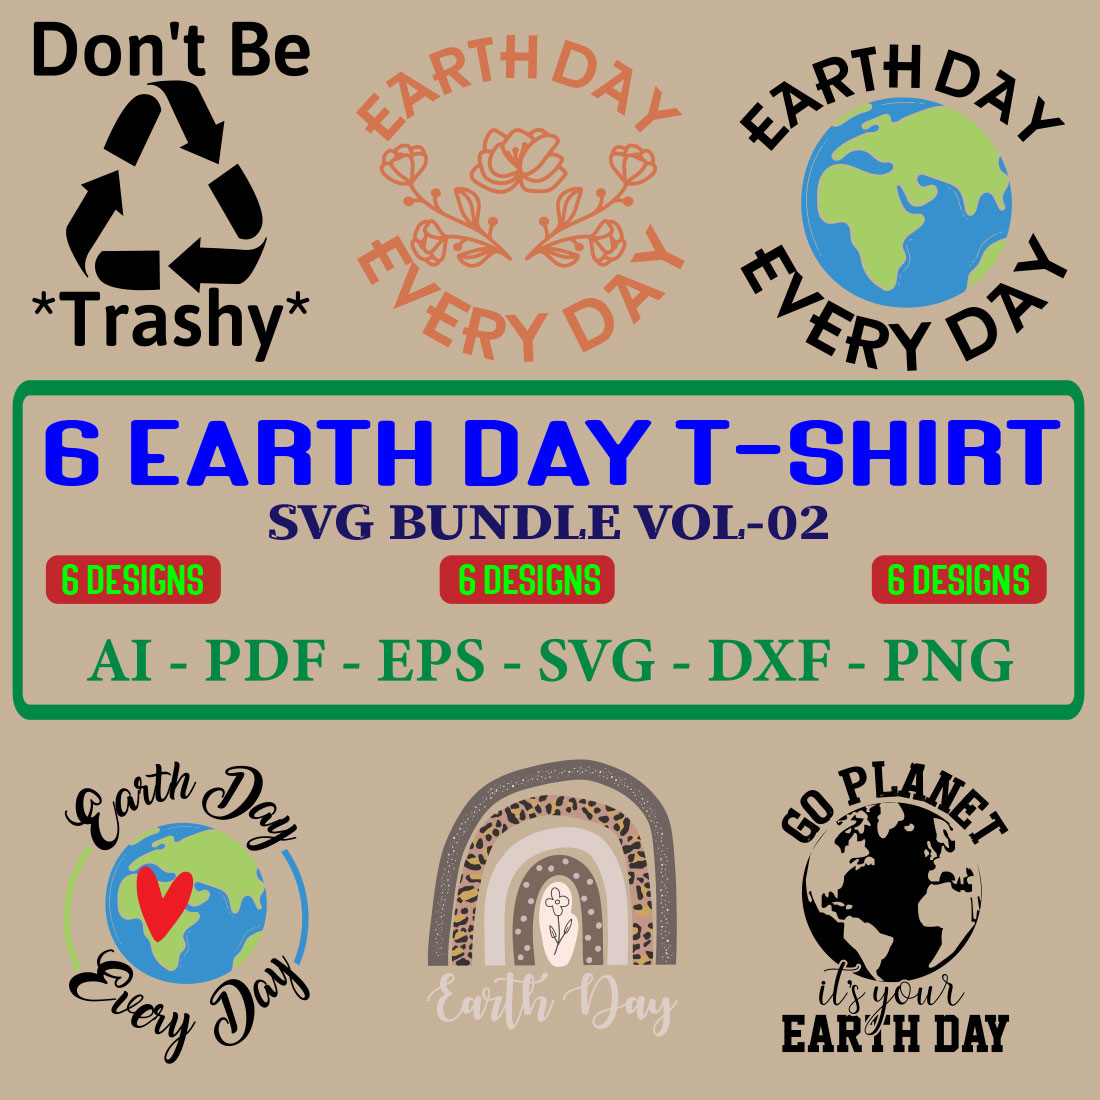 6 Earth Day T-shirt SVG Bundle Vol-02 cover image.